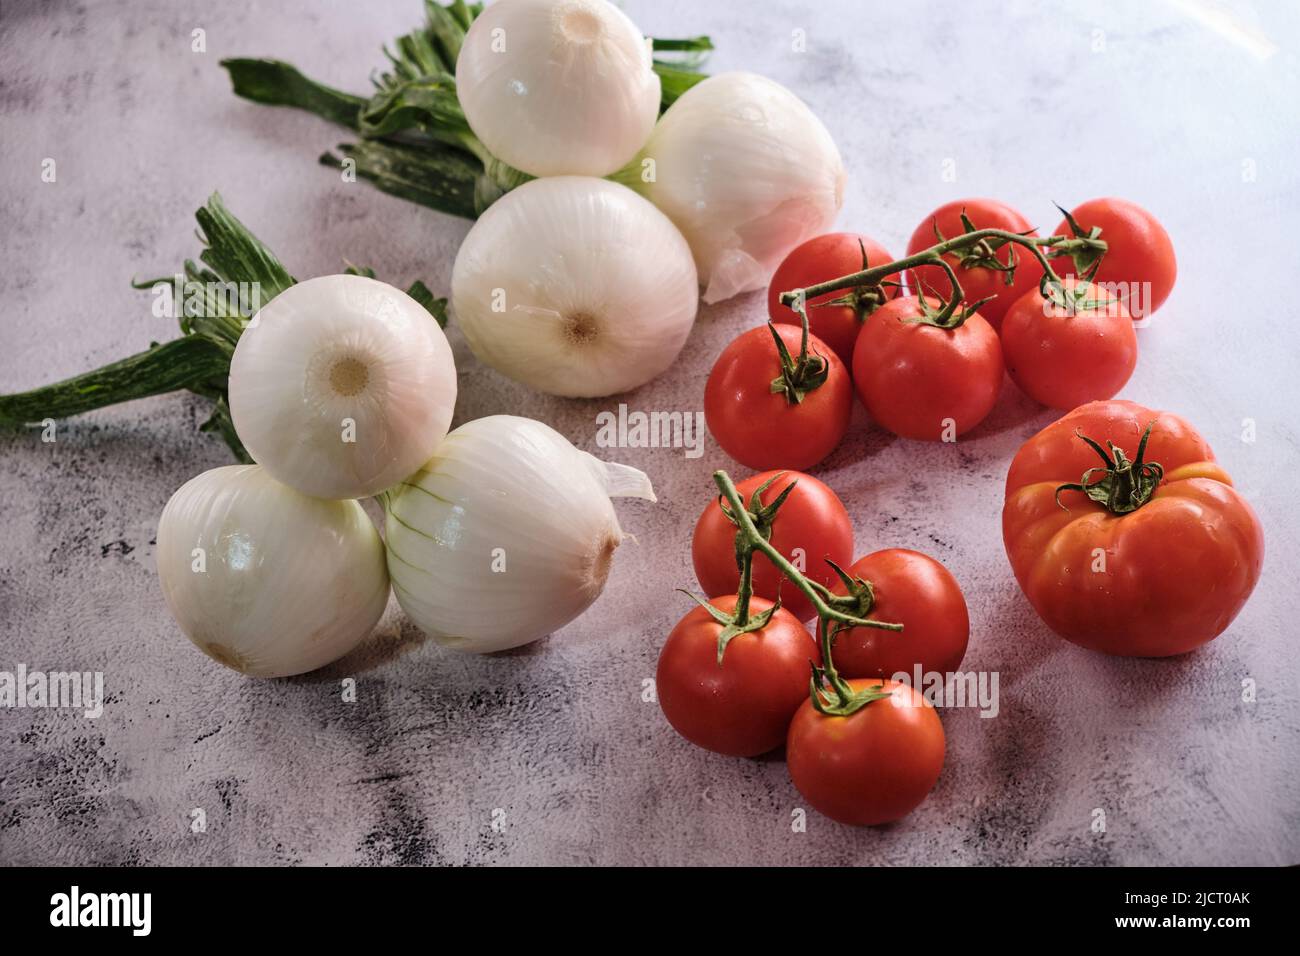 Organic red onions and tomatoes, complements for simple and anticancer salads. Stock Photo